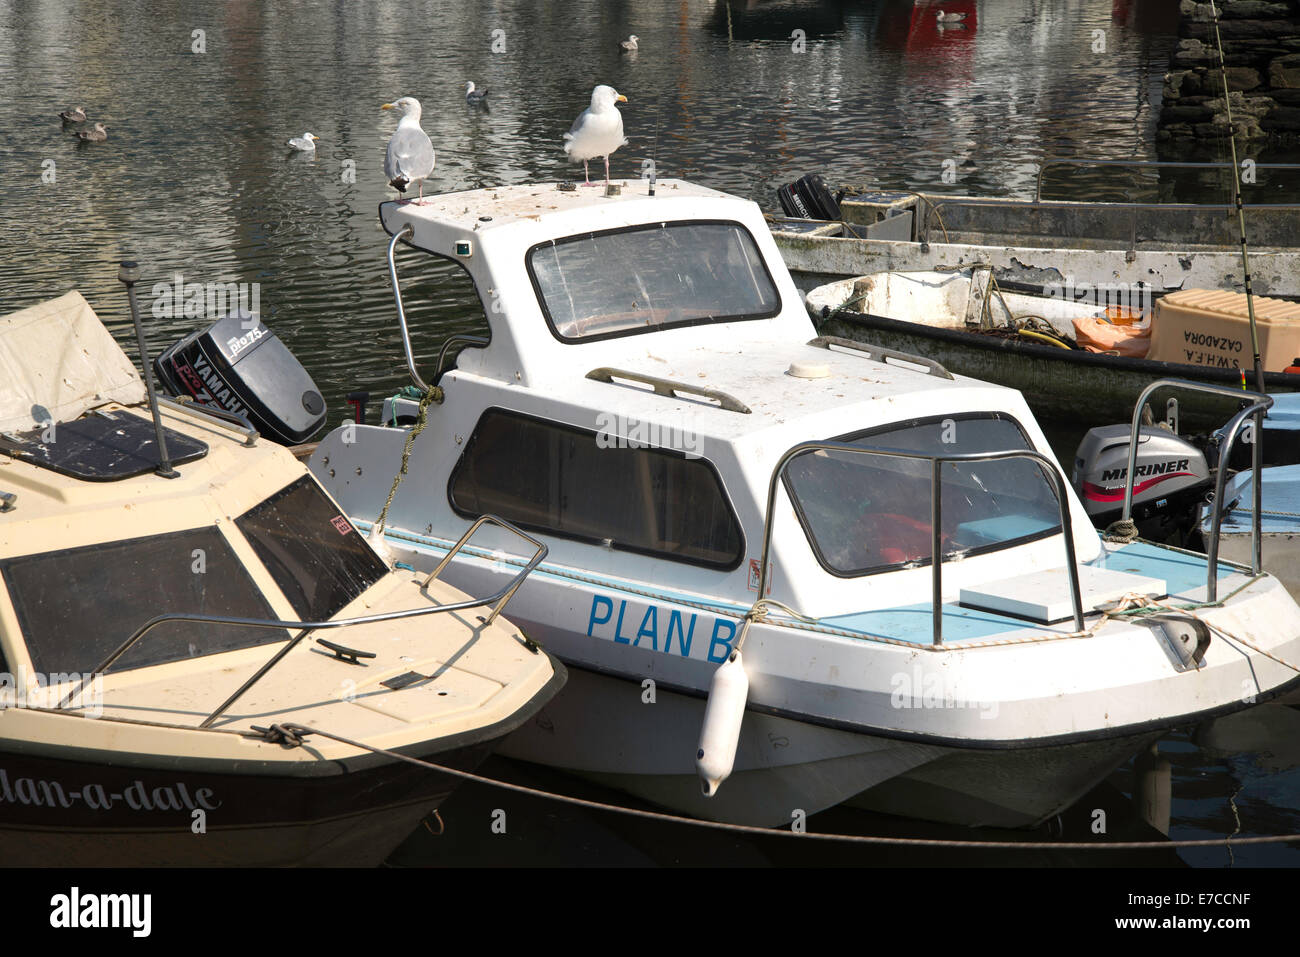 Boat named Plan B with seagulls on roof Stock Photo